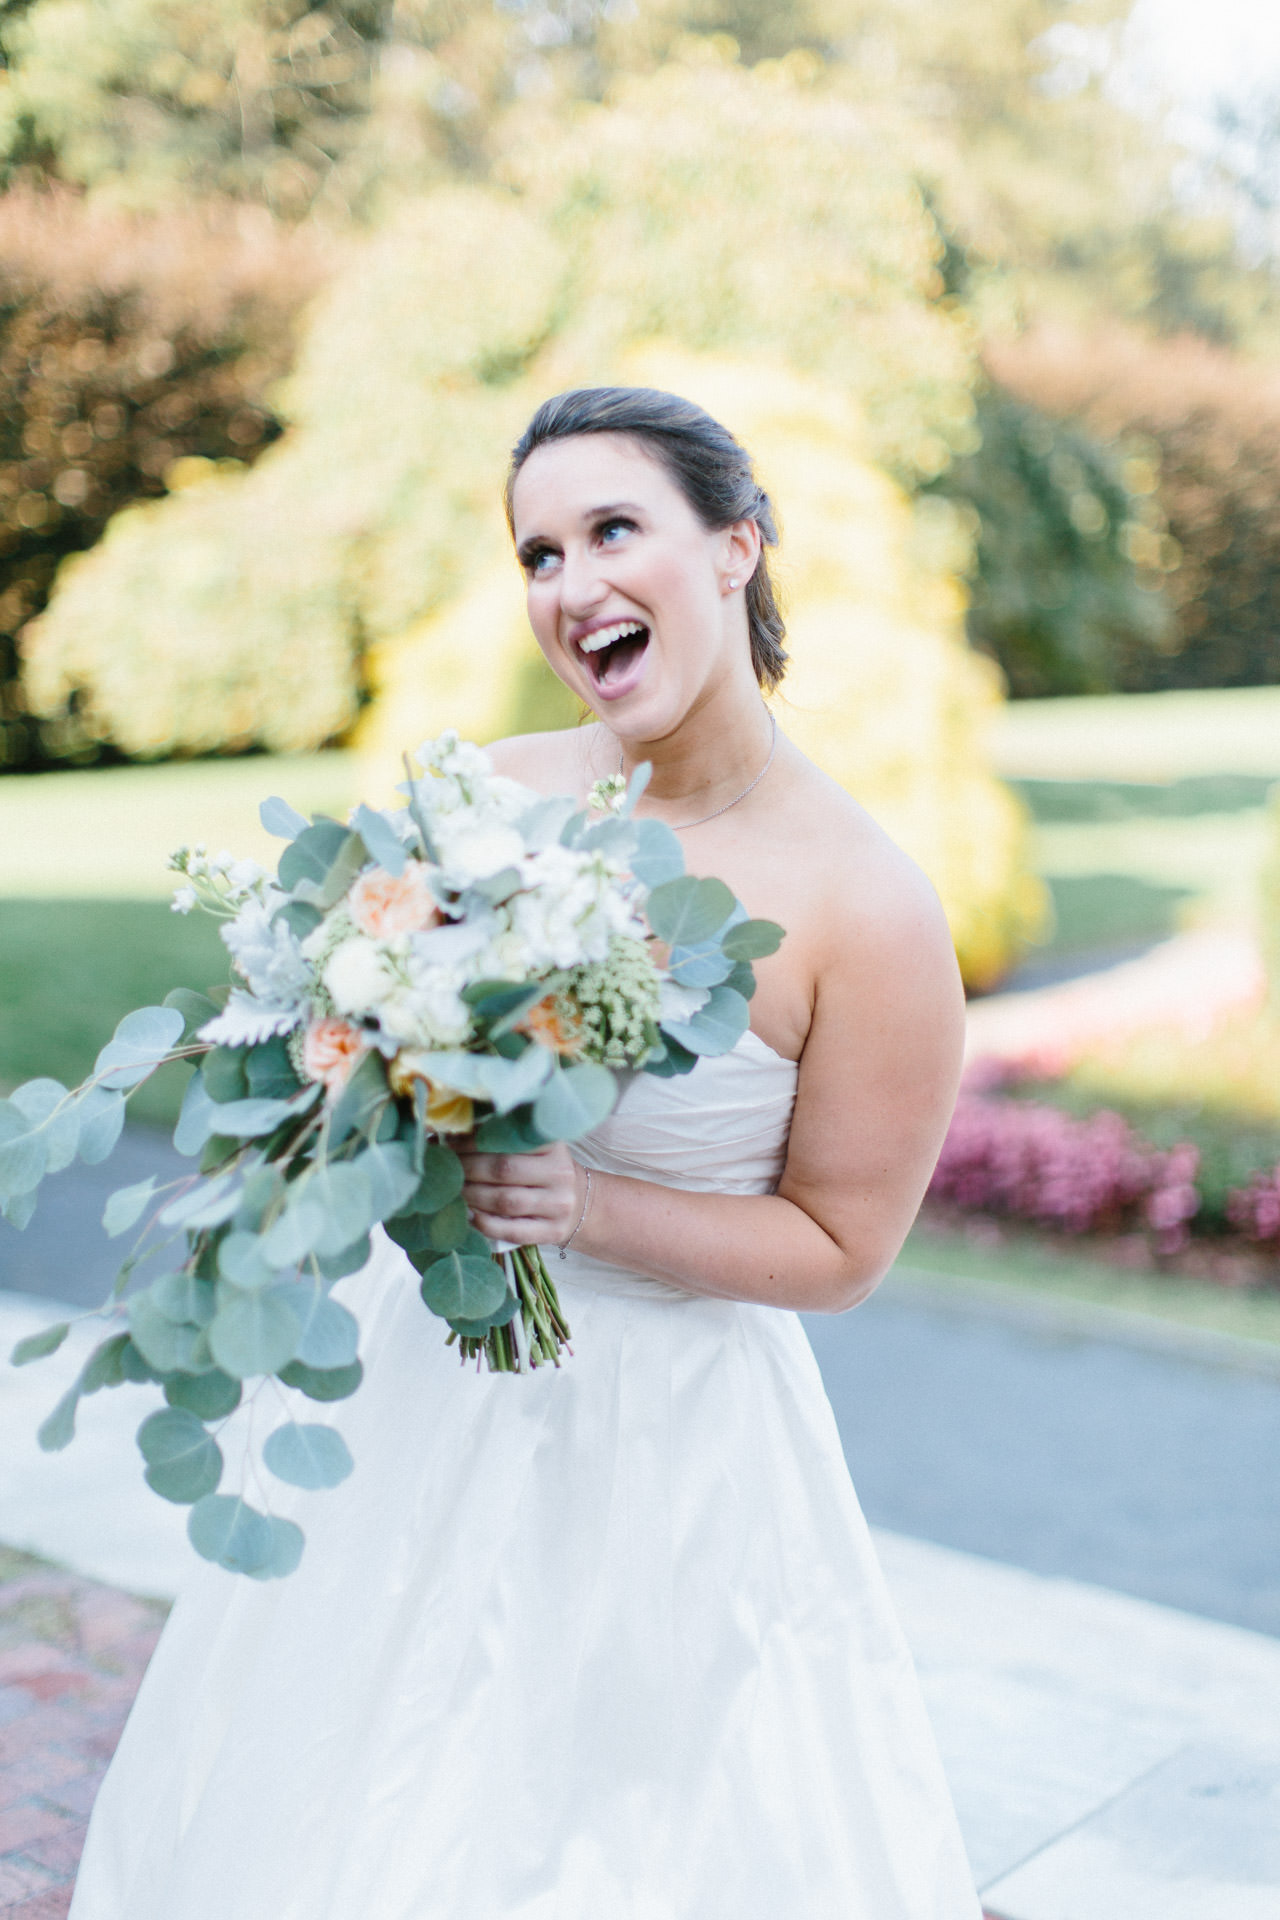 Bride laughing holding her flower bouquet